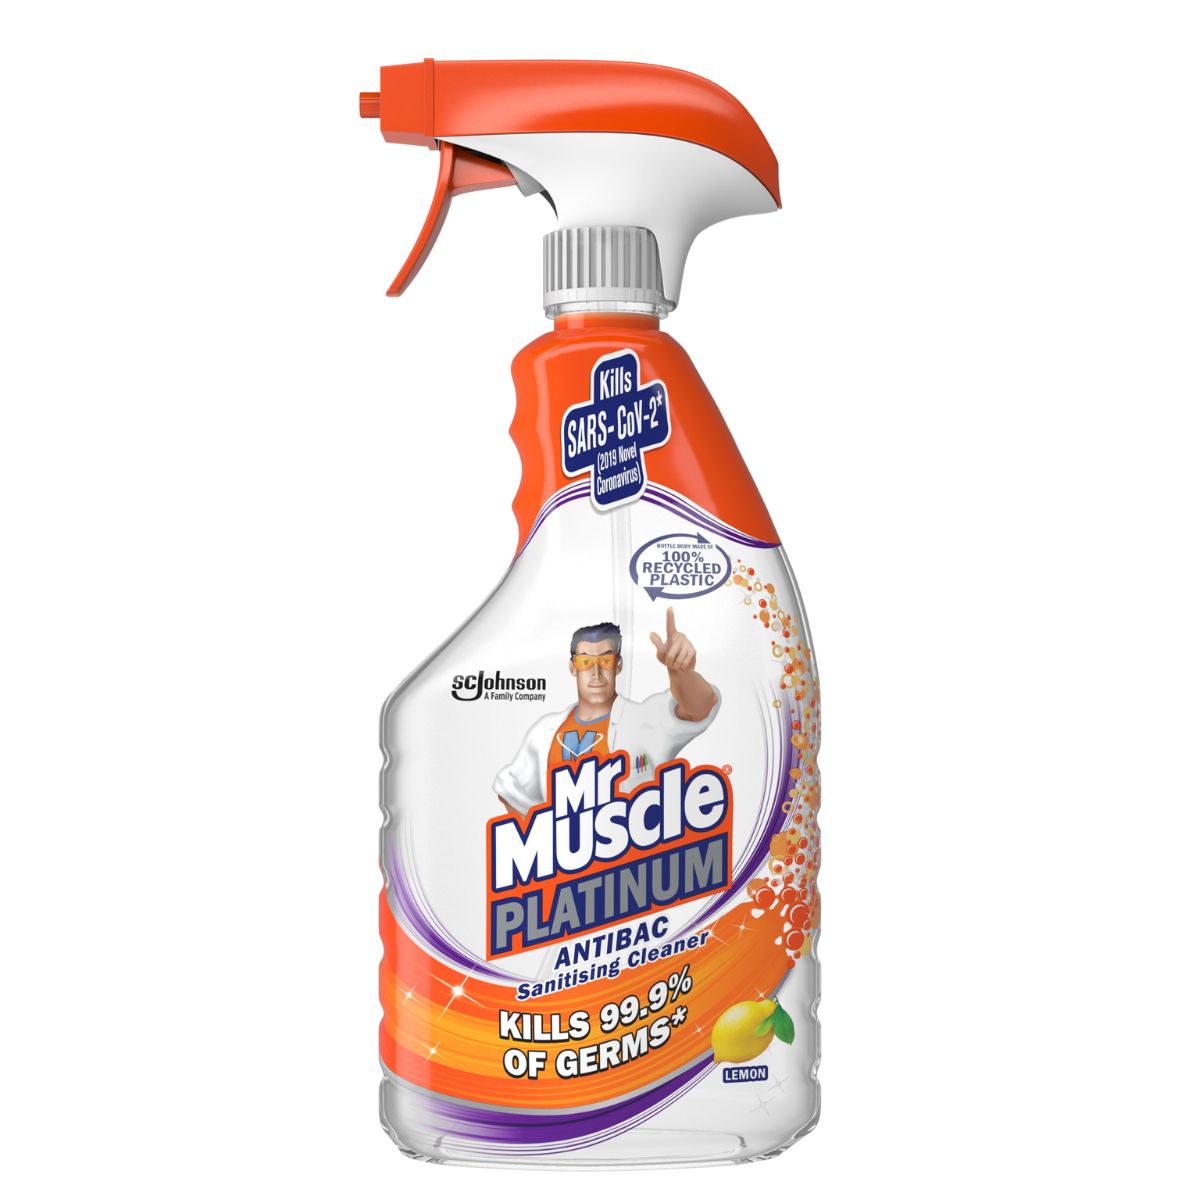 A bottle of Mr Muscle - Platinum Kitchen Citrus - 750ml cleaning spray.